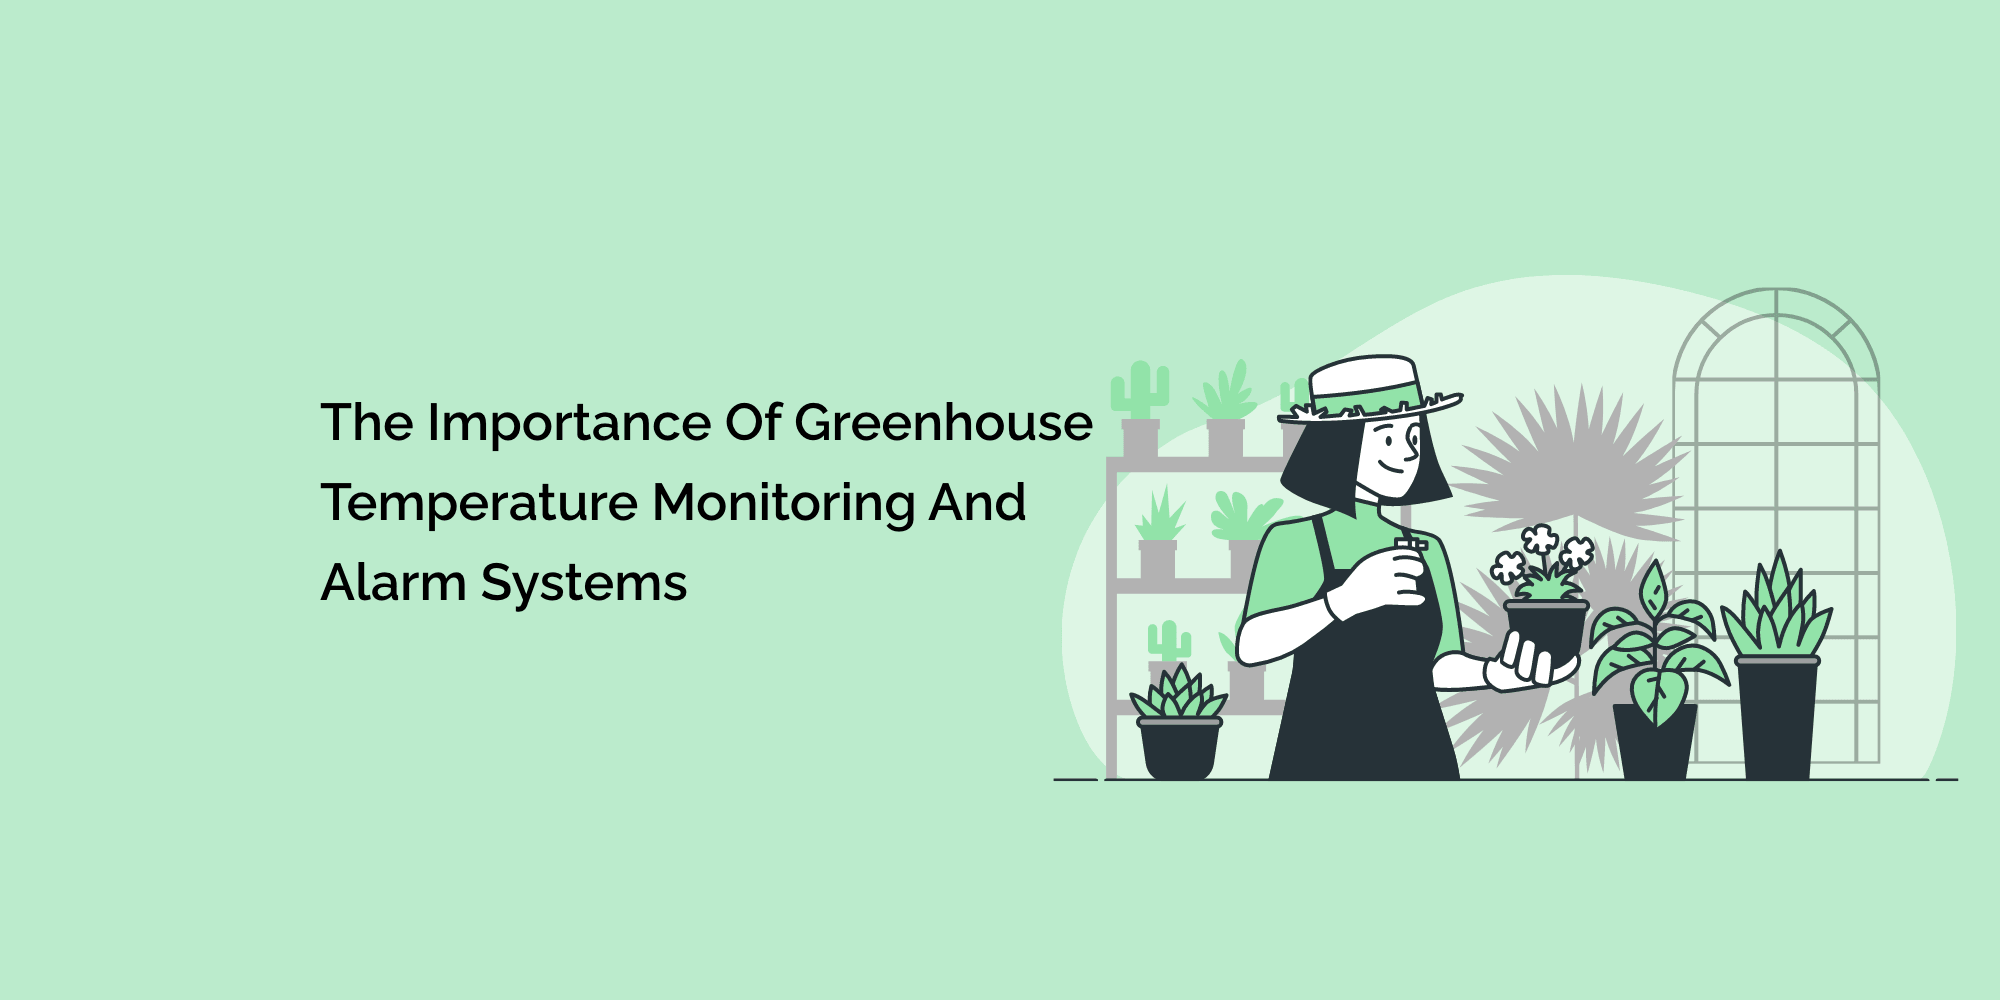 The Importance of Greenhouse Temperature Monitoring and Alarm Systems